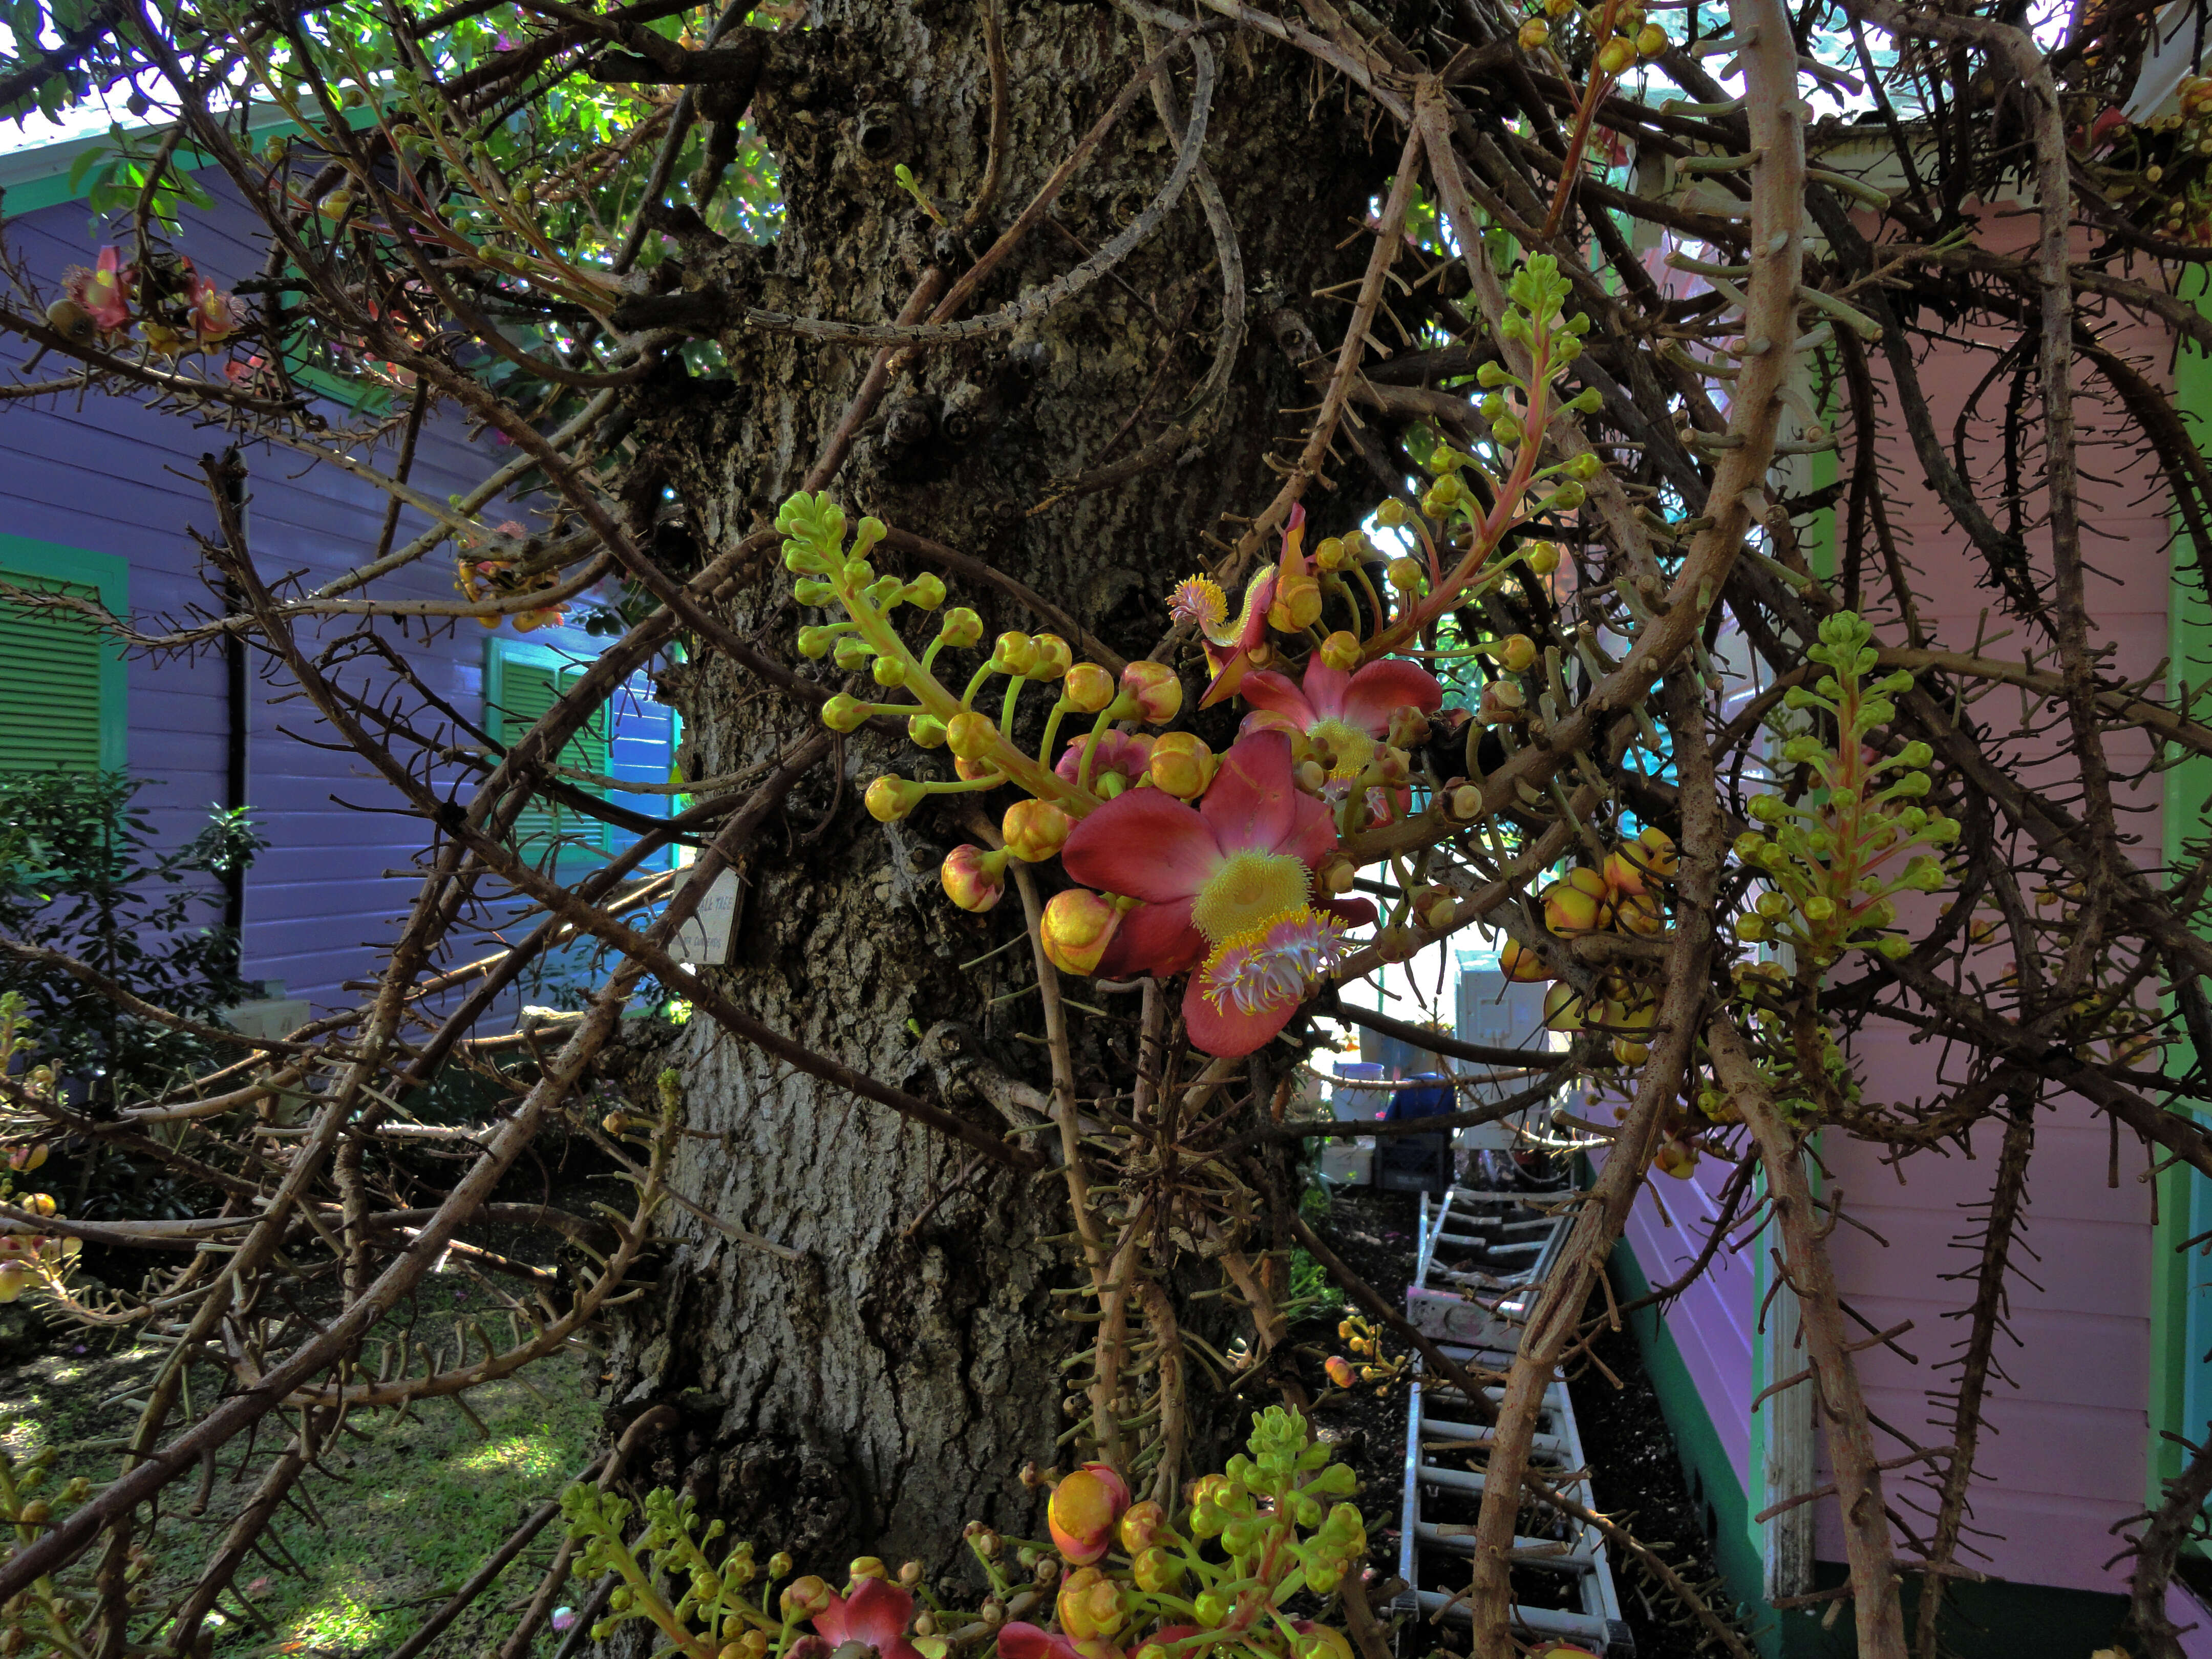 Image of Cannonball Tree